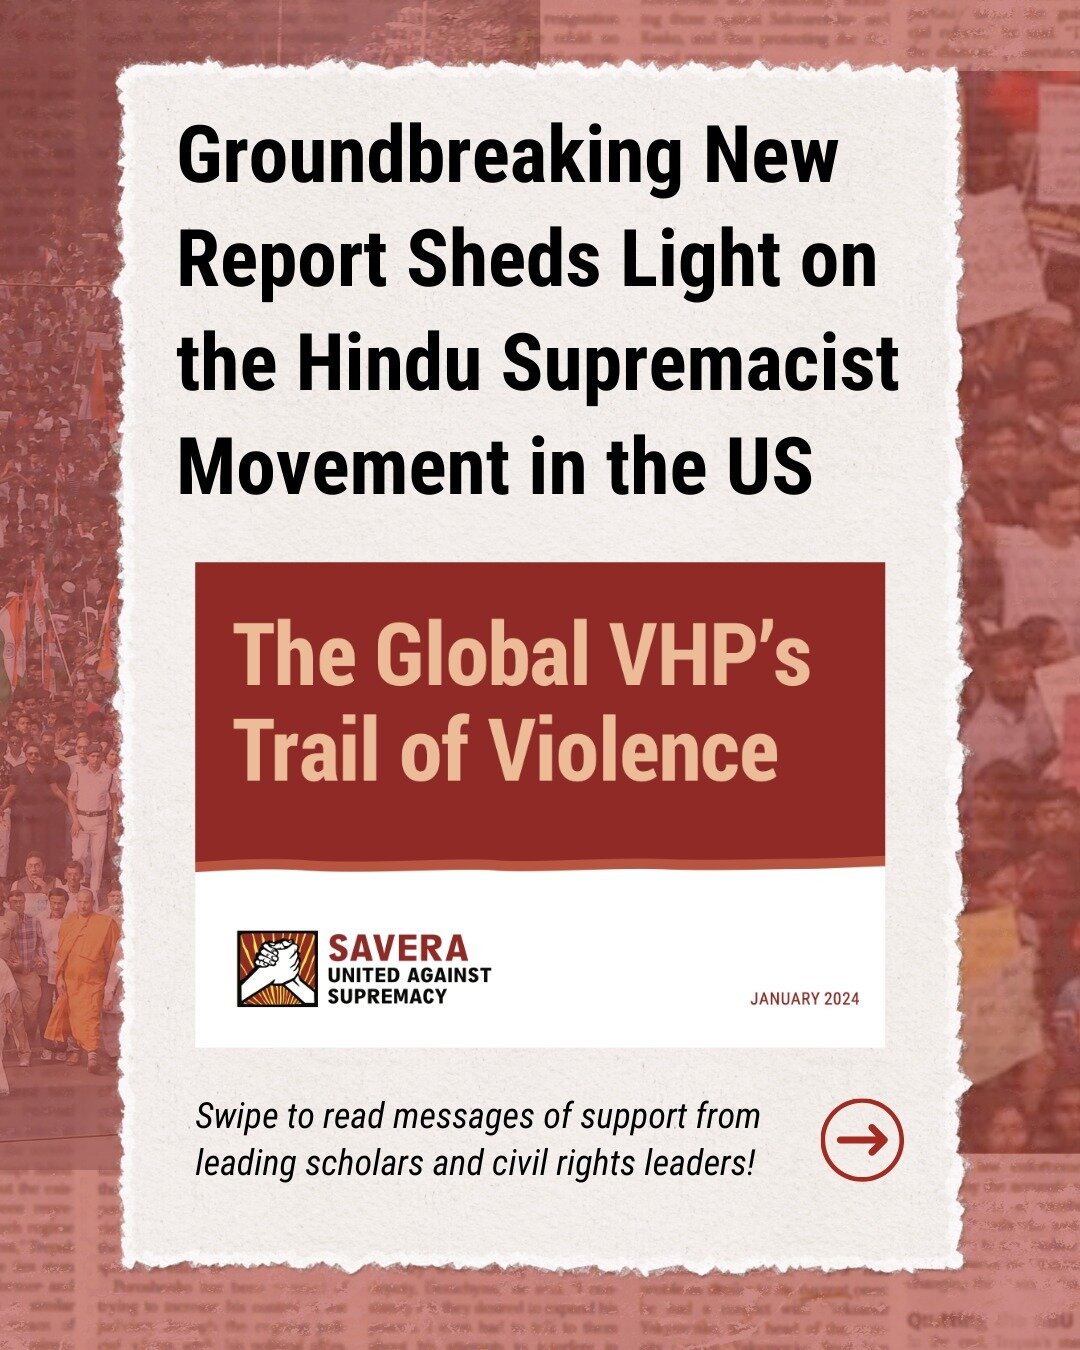 HfHR is proud to be part of the @wearesavera coalition&mdash;an interfaith, multi-racial, anti-caste coalition of activists and organizations working together to resist the rise of supremacist hatred and build a new world for our communities. Today, 